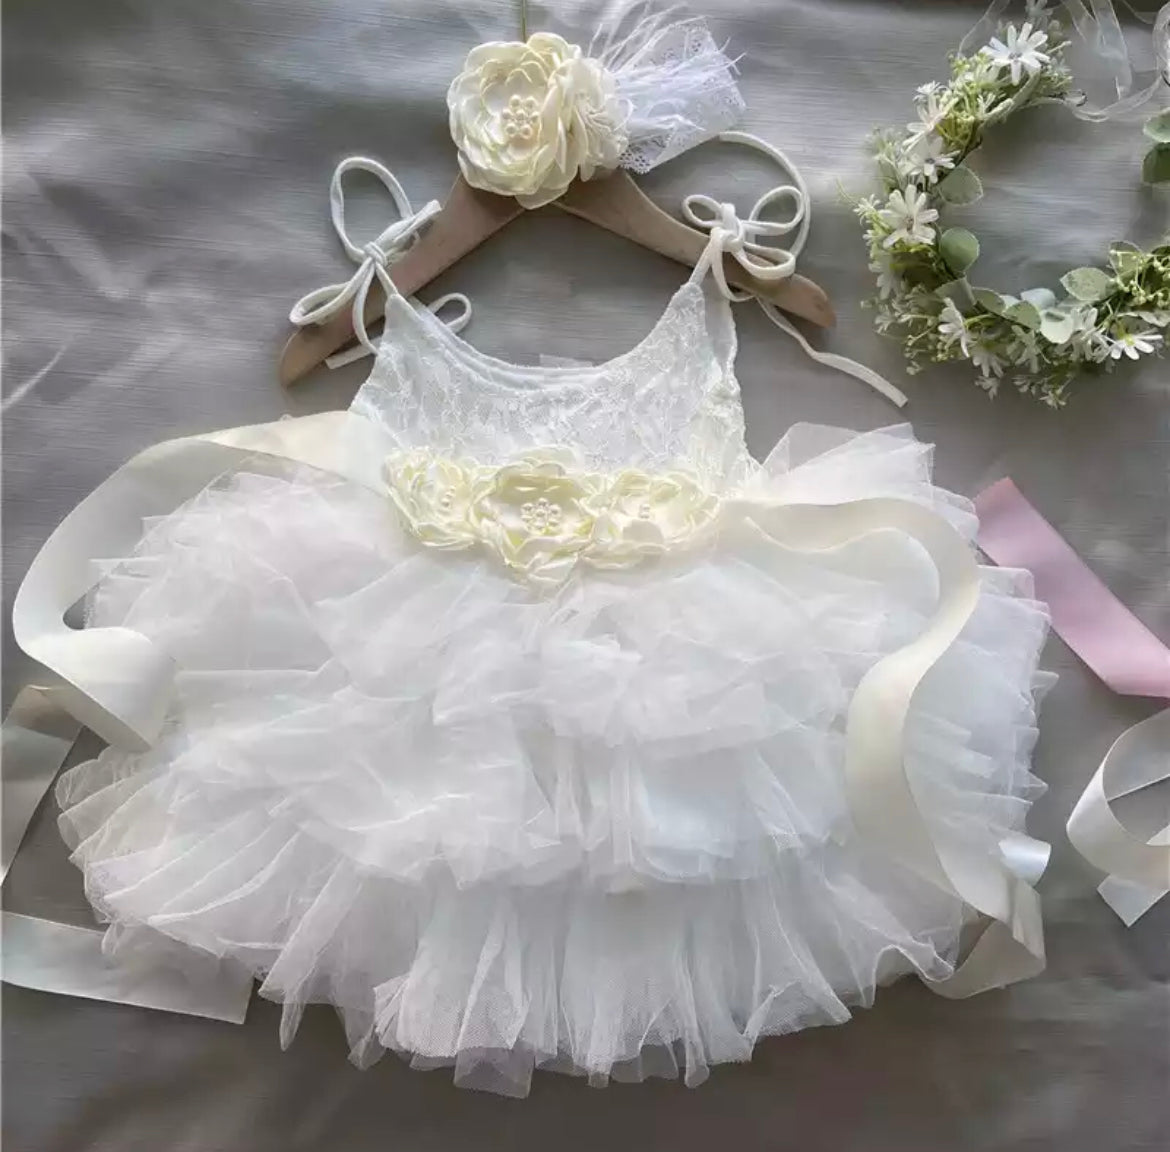 Delilah - Princess Lace & Tulle Dress with Floral Sash + Headband  - Crystal White.